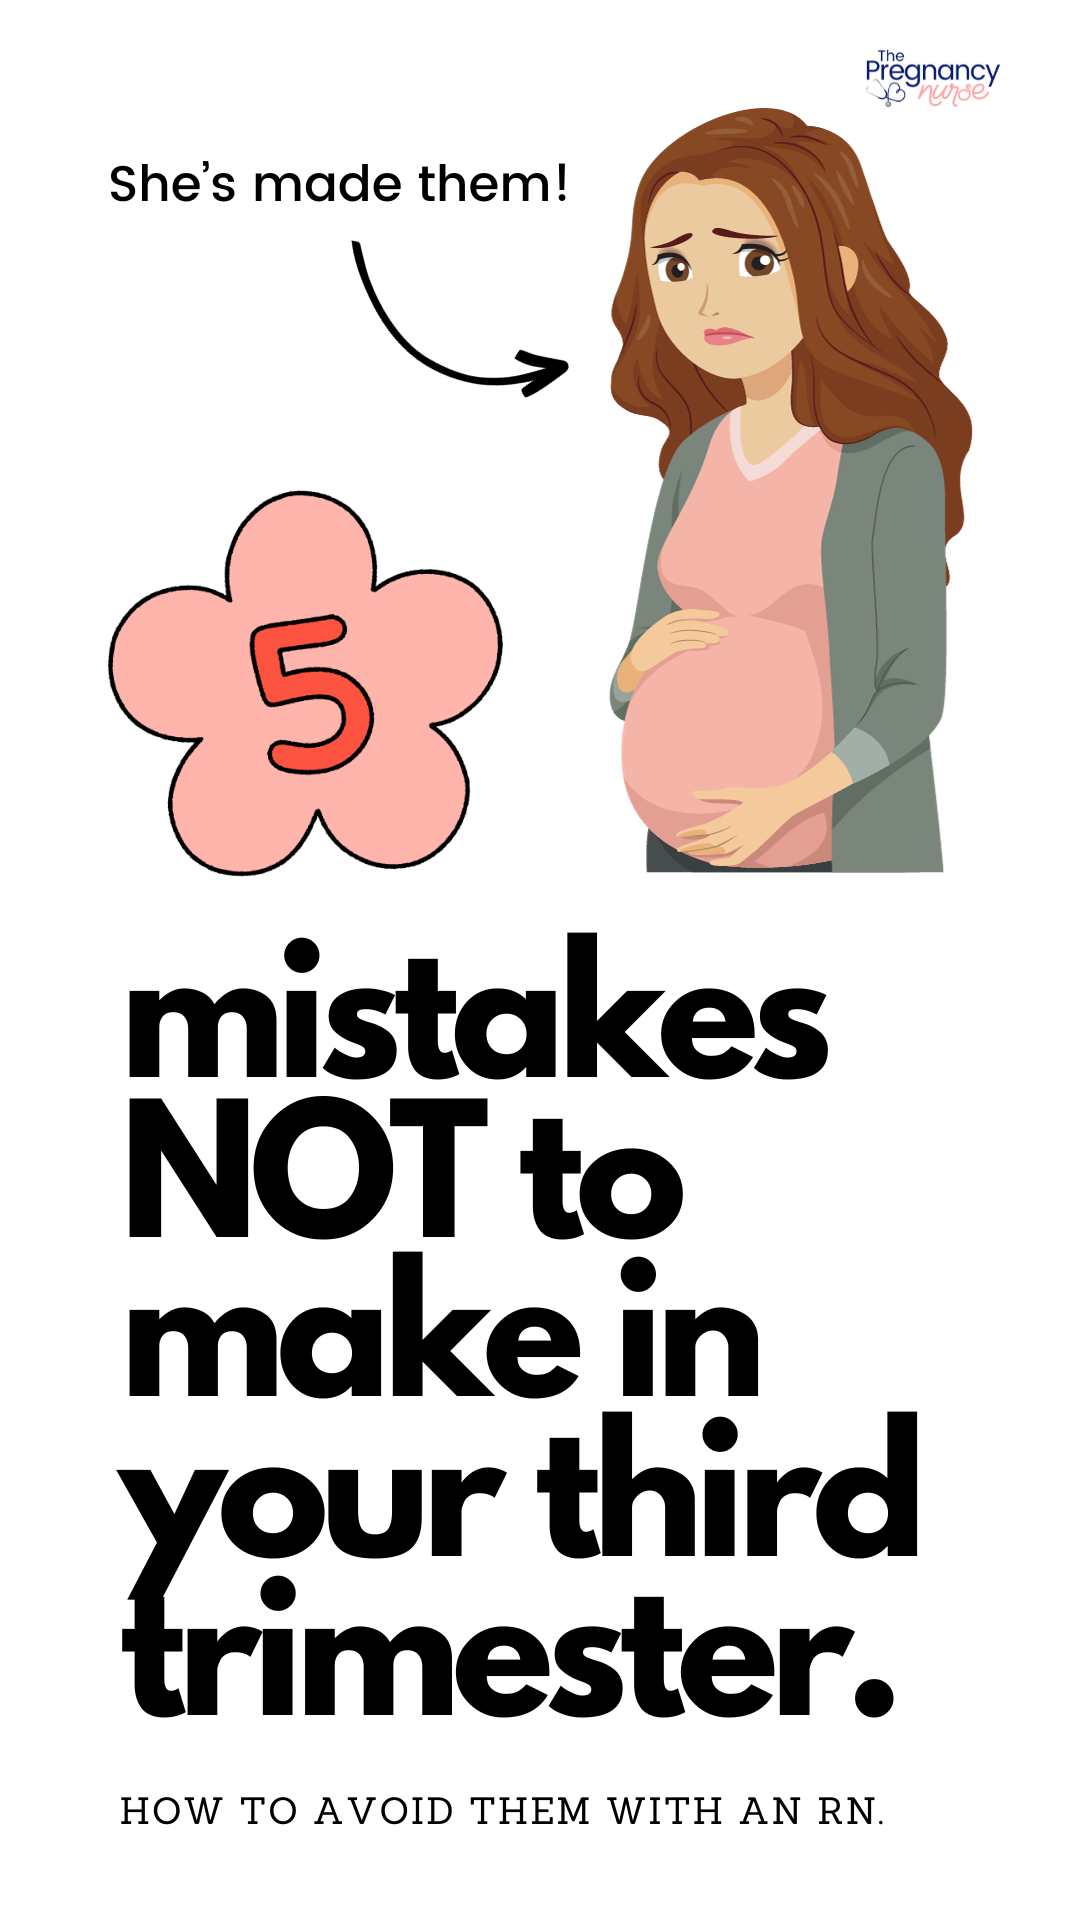 worried pregnant woman / 5 mistakes not to make in your third trimester /and how to avoid them.